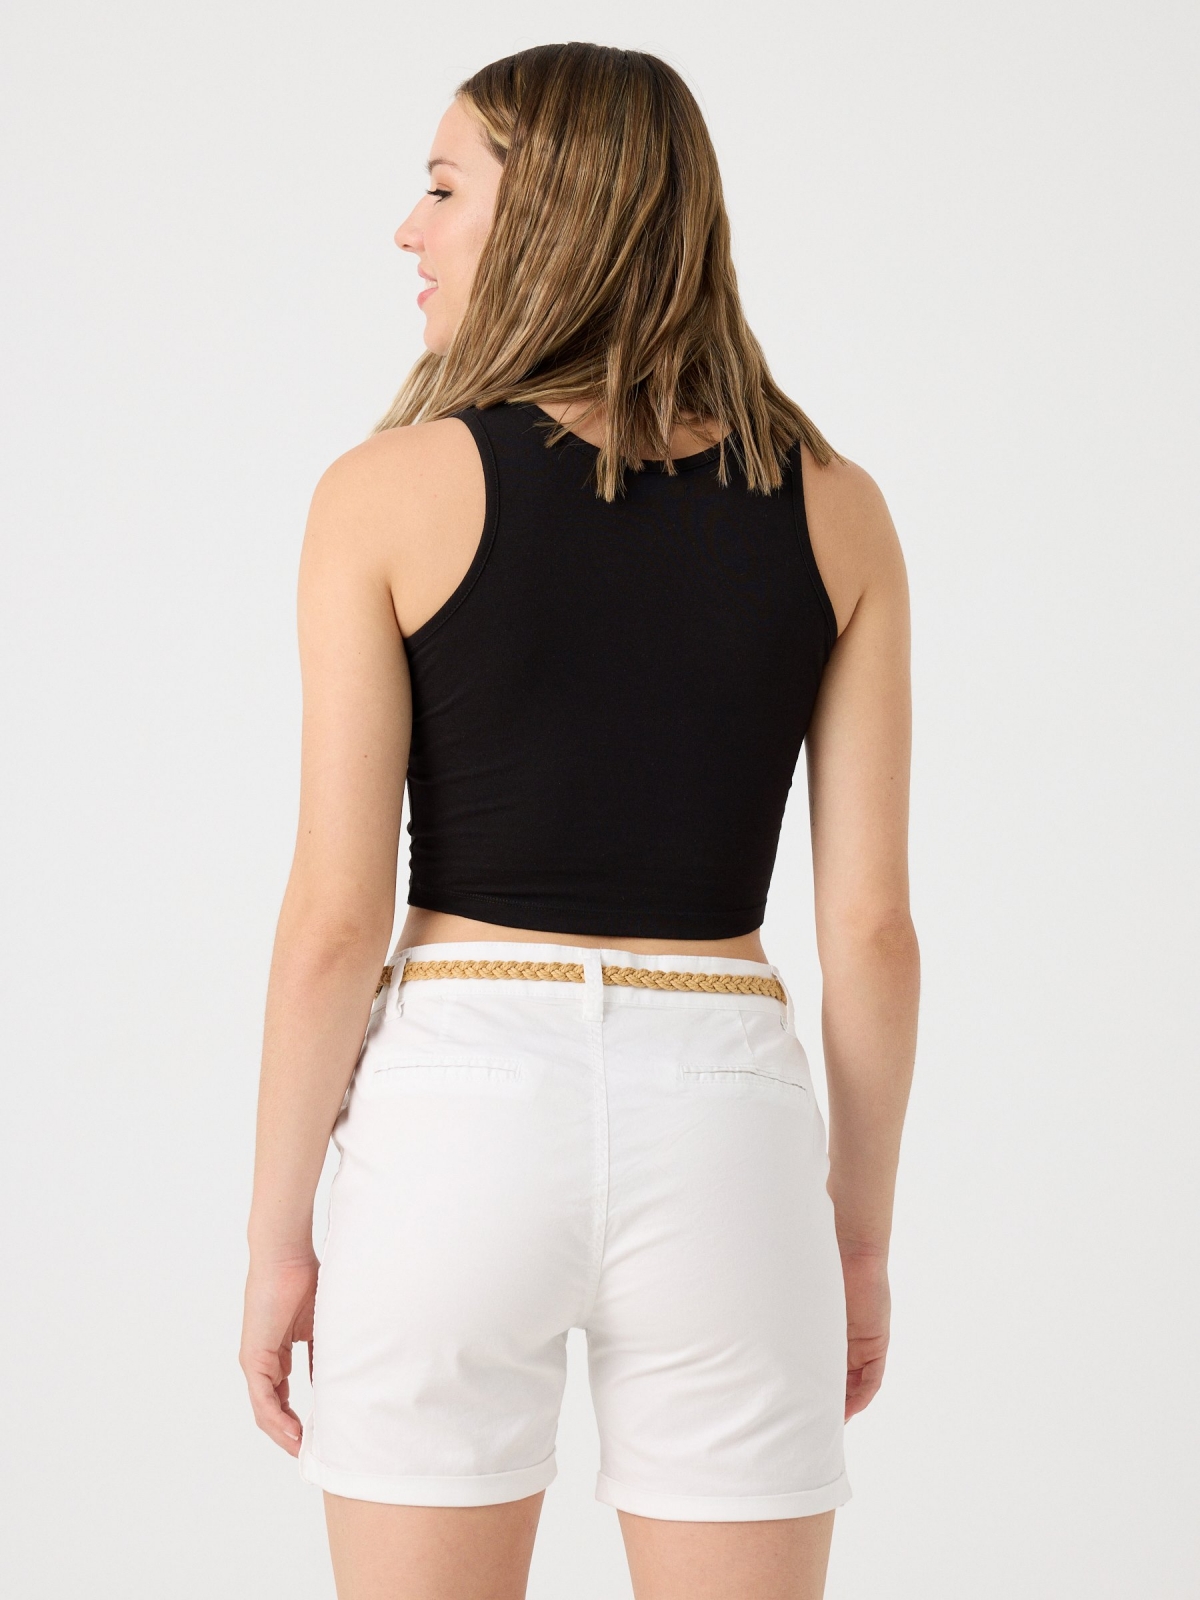 Braided belt shorts white middle back view